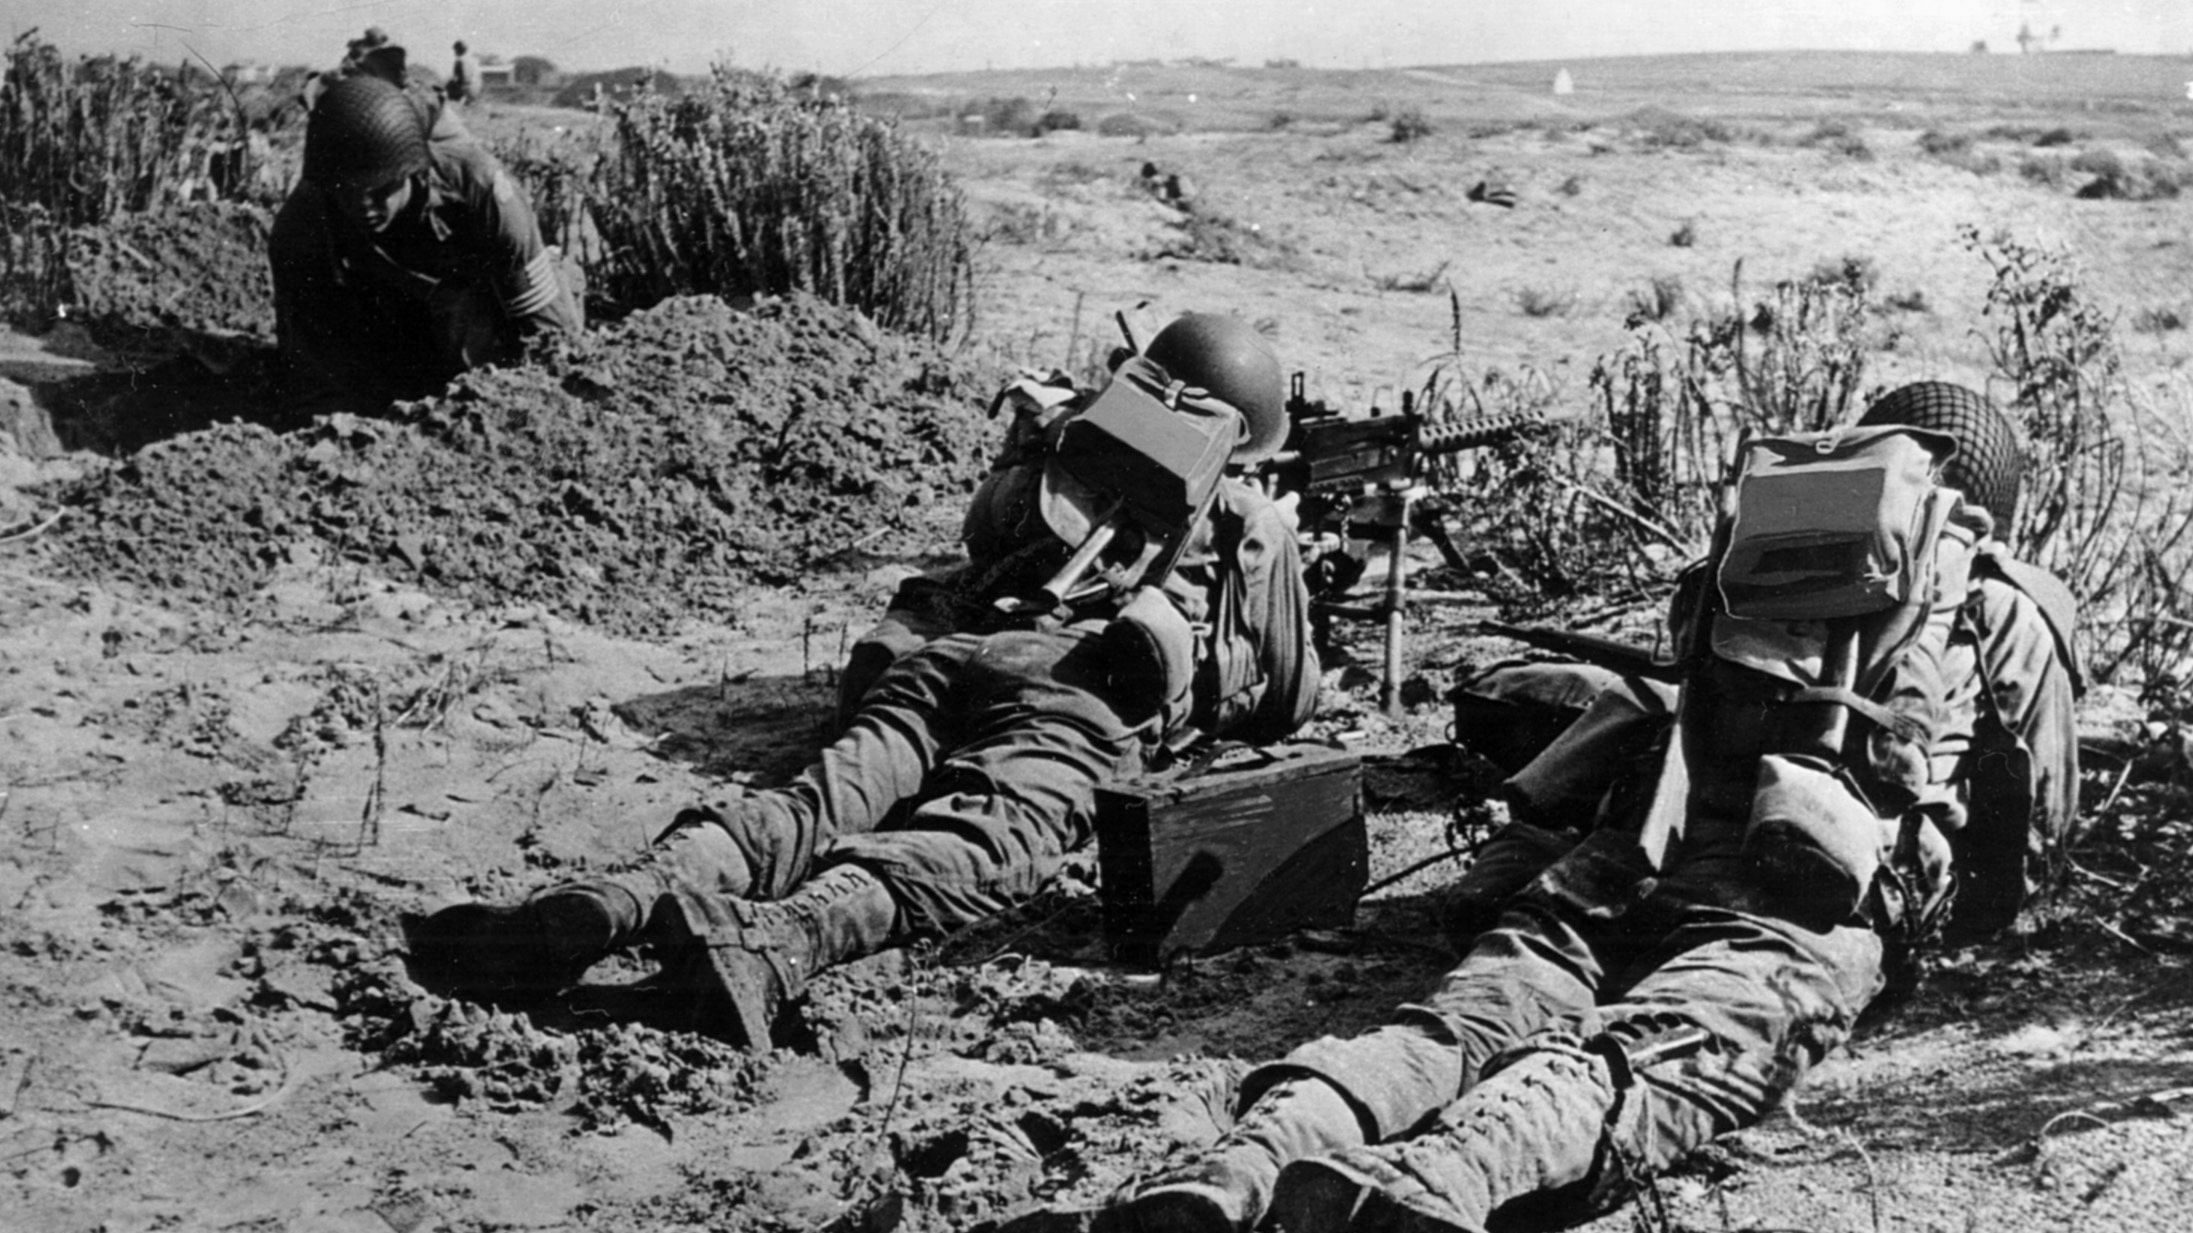 On November 10, 1942, American troops occupy a machine-gun position in North Africa. The troops met sporadic resistance from Vichy French forces.